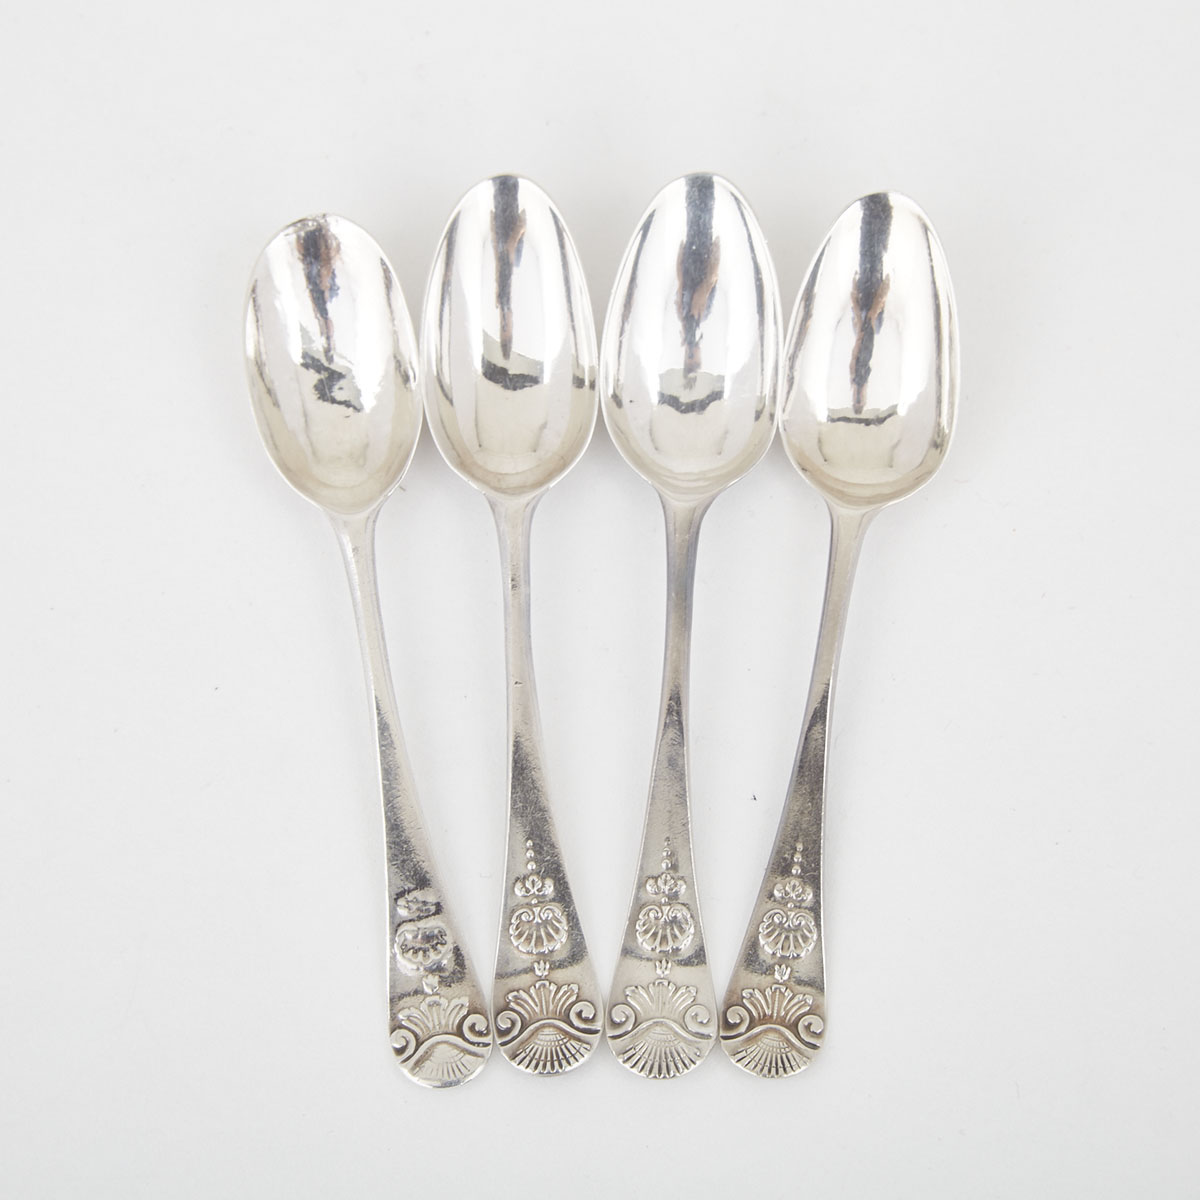 Four George II Silver Scroll and Shell Tea Spoons, Ann Hill, London, c.1740